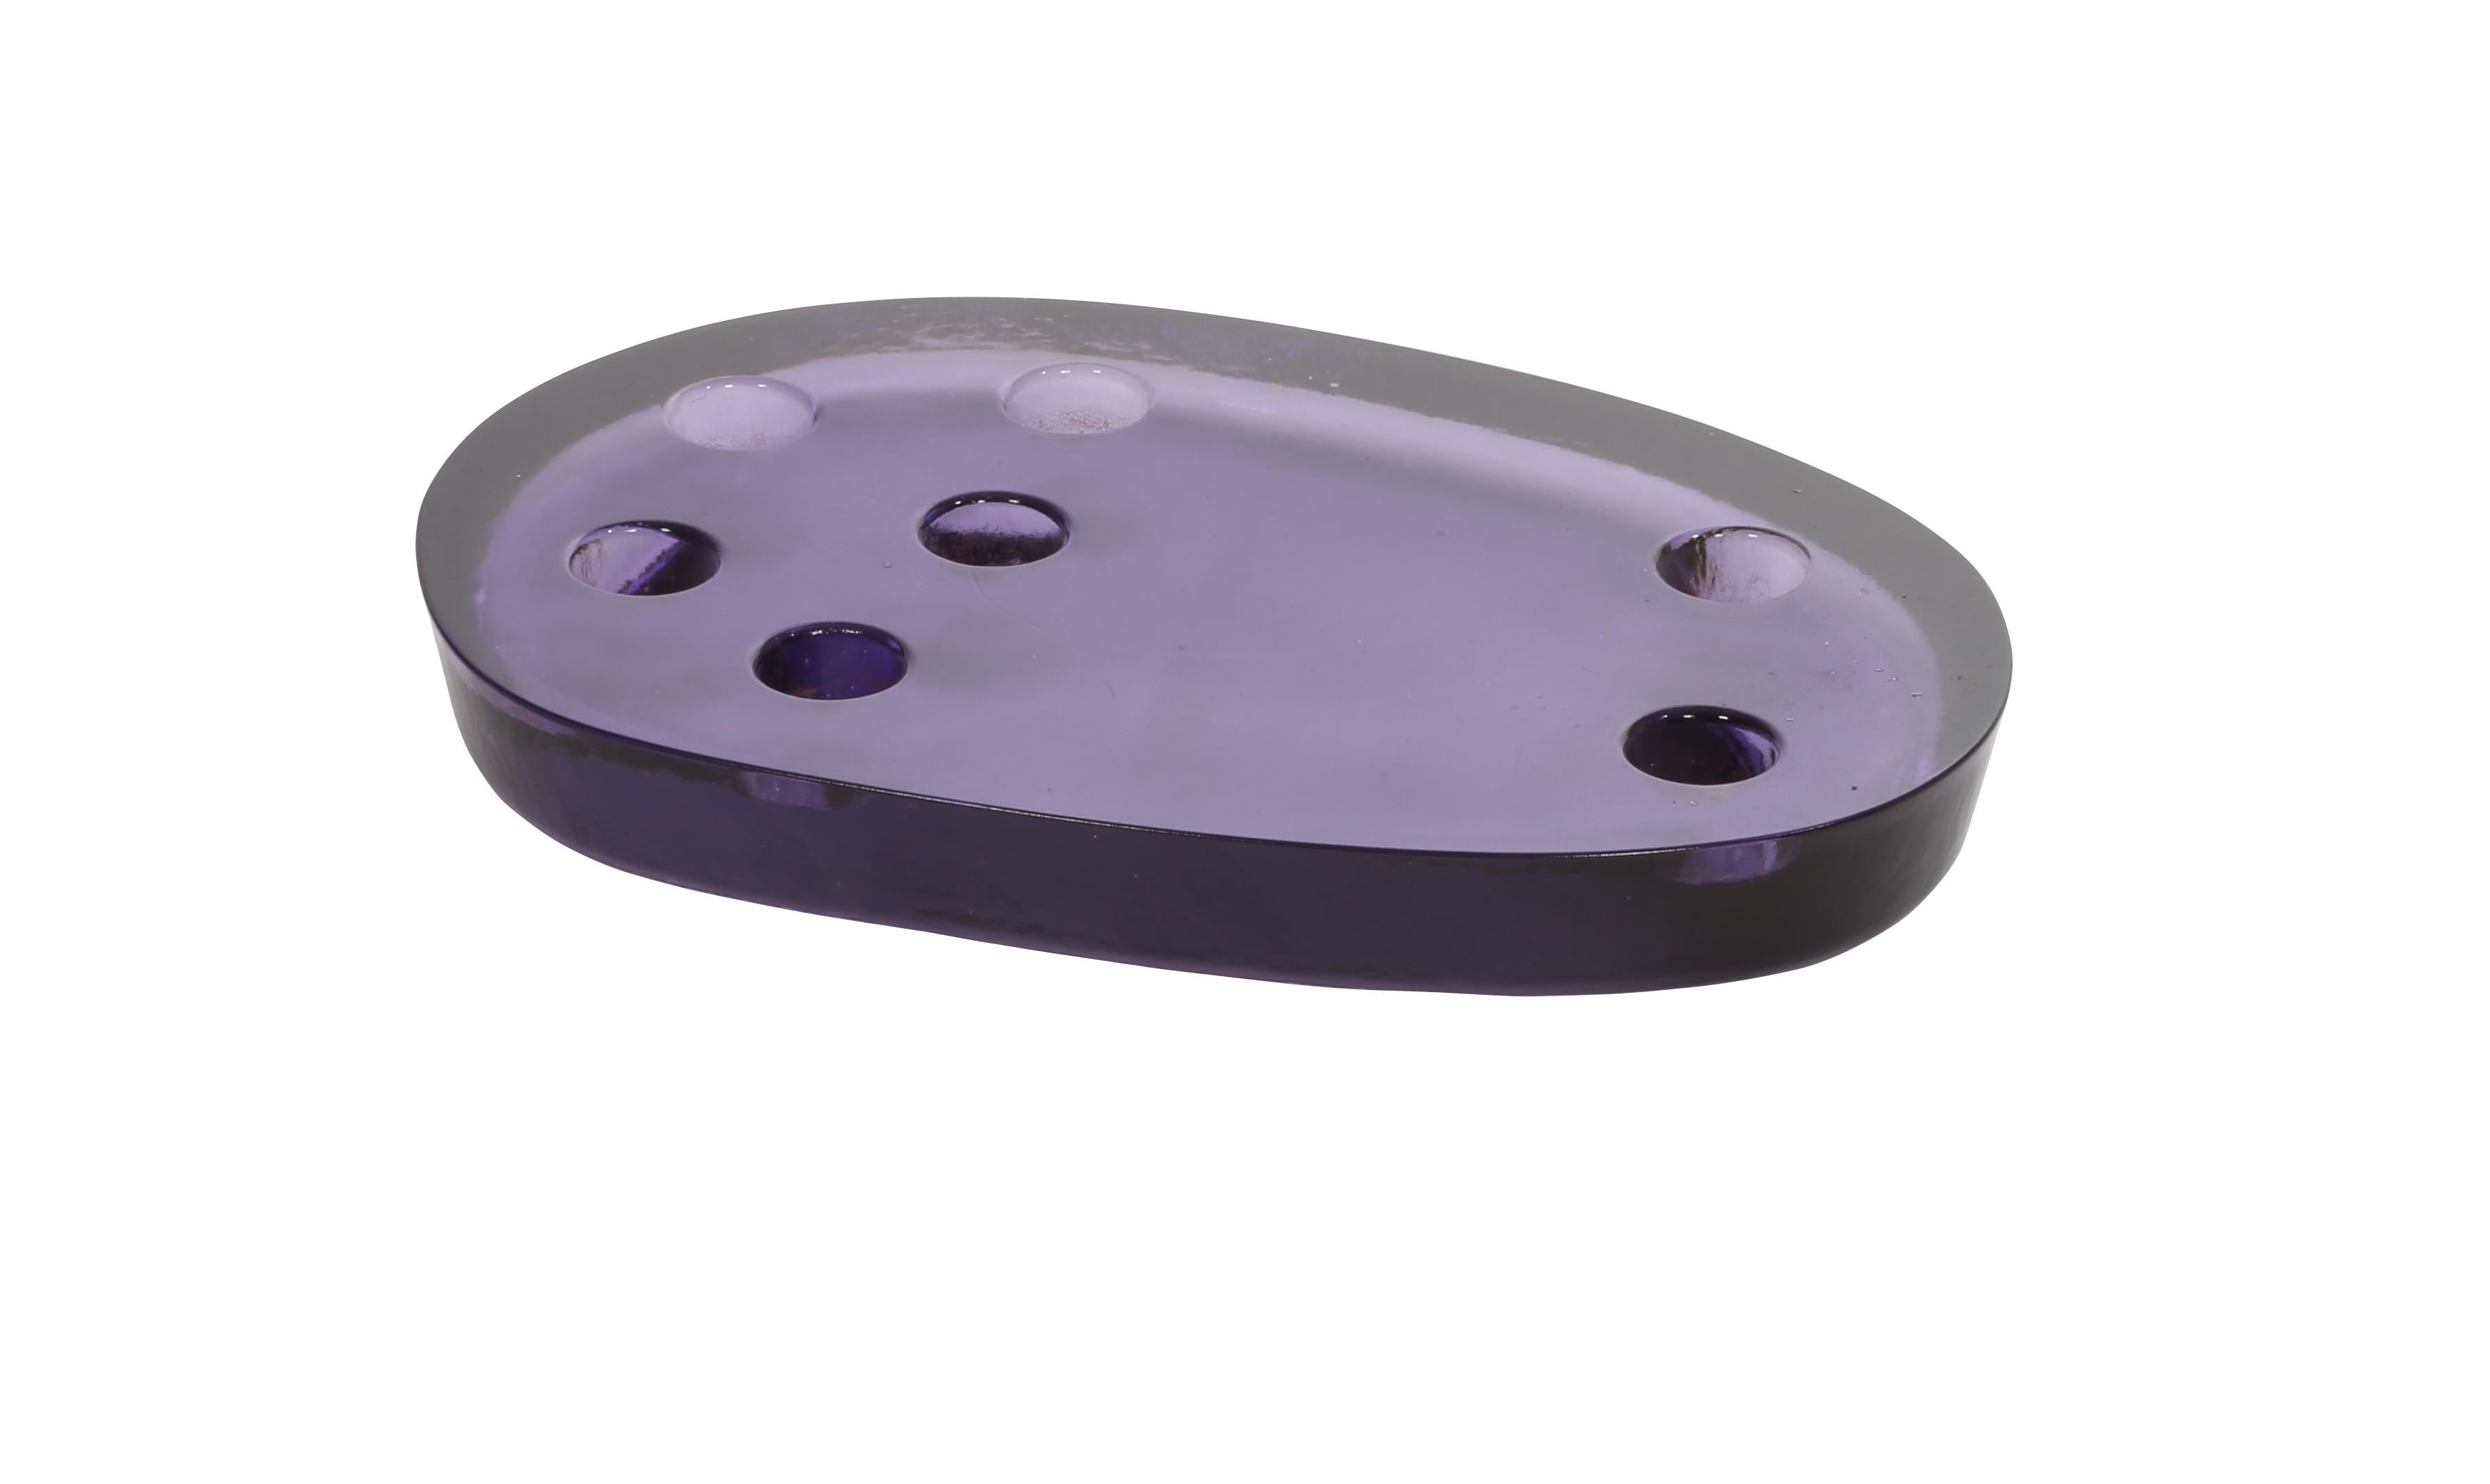 Atoll Big Amethyst candle holder by Pulpo
Dimensions: D32 x W22 x H4 cm
Materials: casted glass

Also available in different colors. 

These simple forms refer to the free-form nature of volcanic islands – much like the changing of glass from